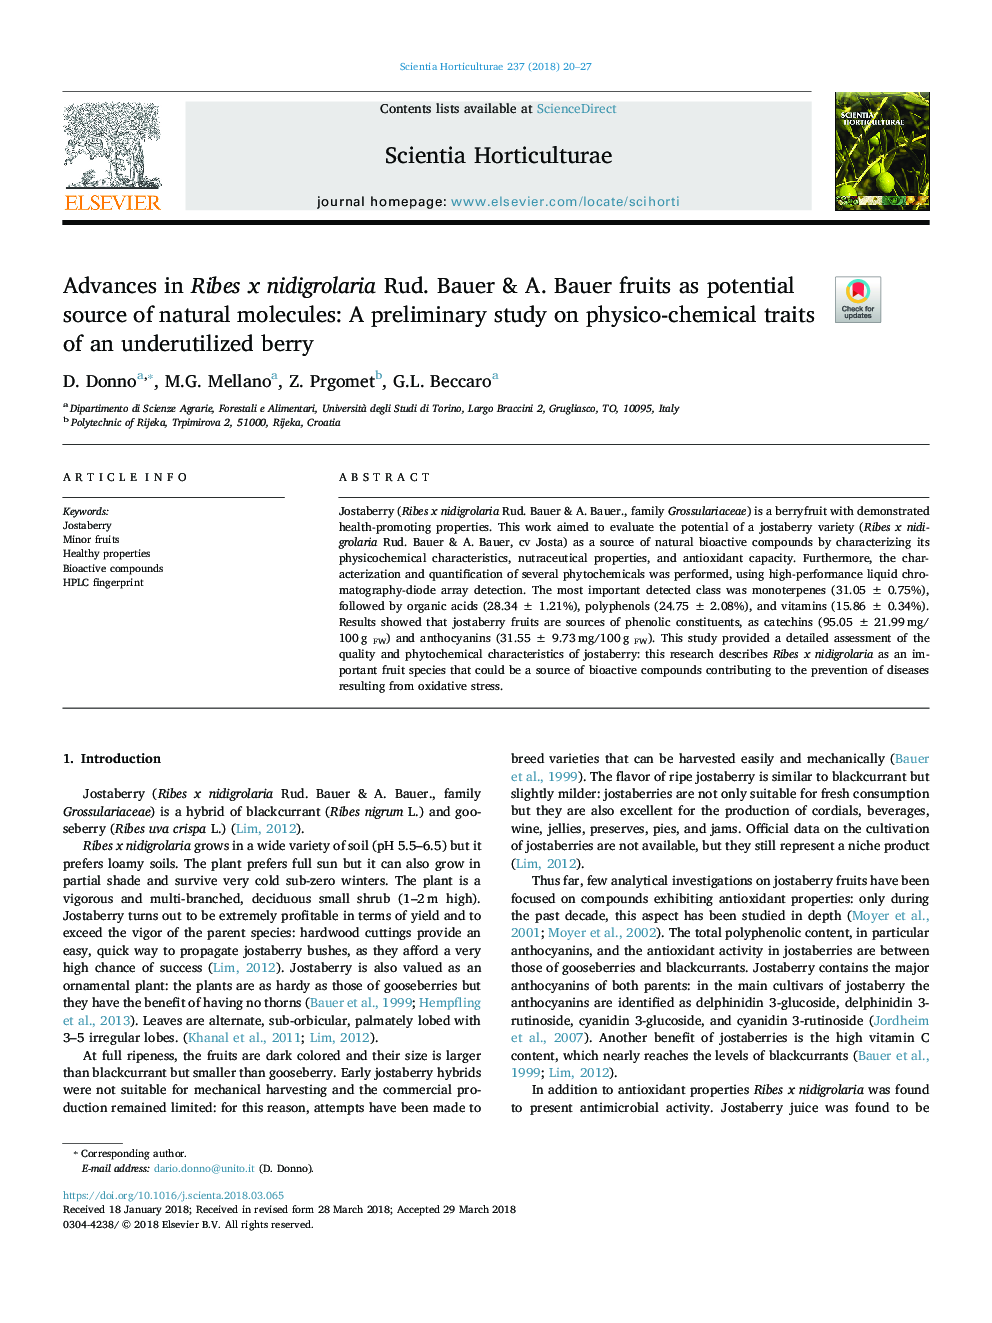 Advances in Ribes x nidigrolaria Rud. Bauer & A. Bauer fruits as potential source of natural molecules: A preliminary study on physico-chemical traits of an underutilized berry